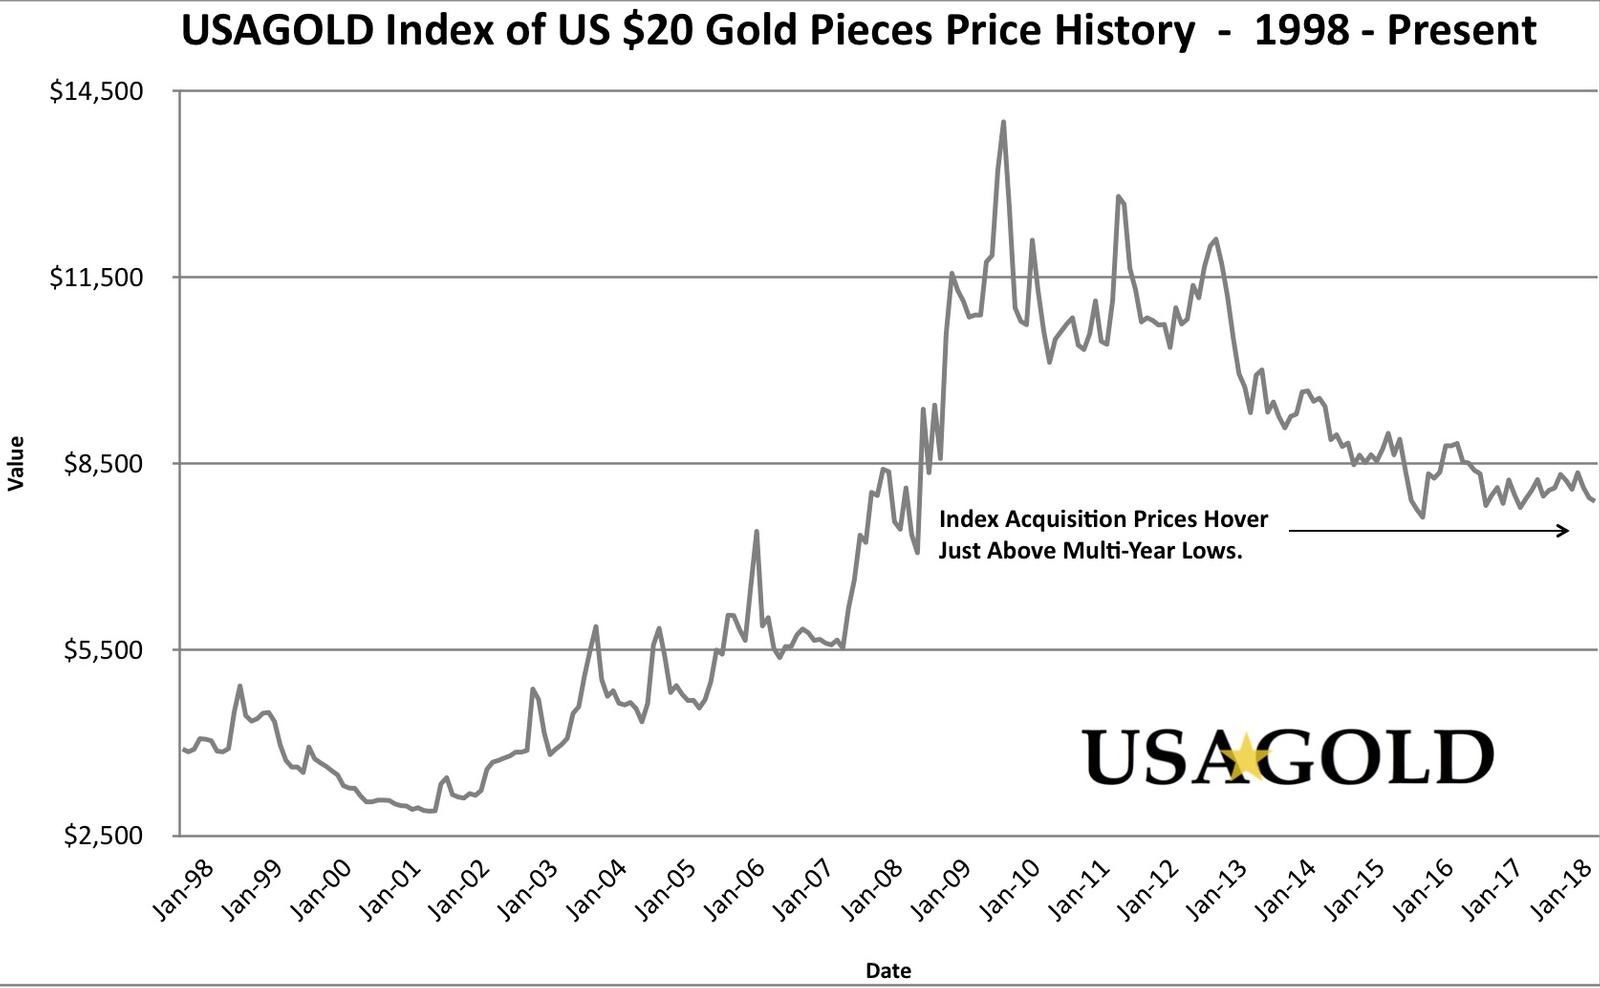 Line chart of price history 5 piece $20 gold index set